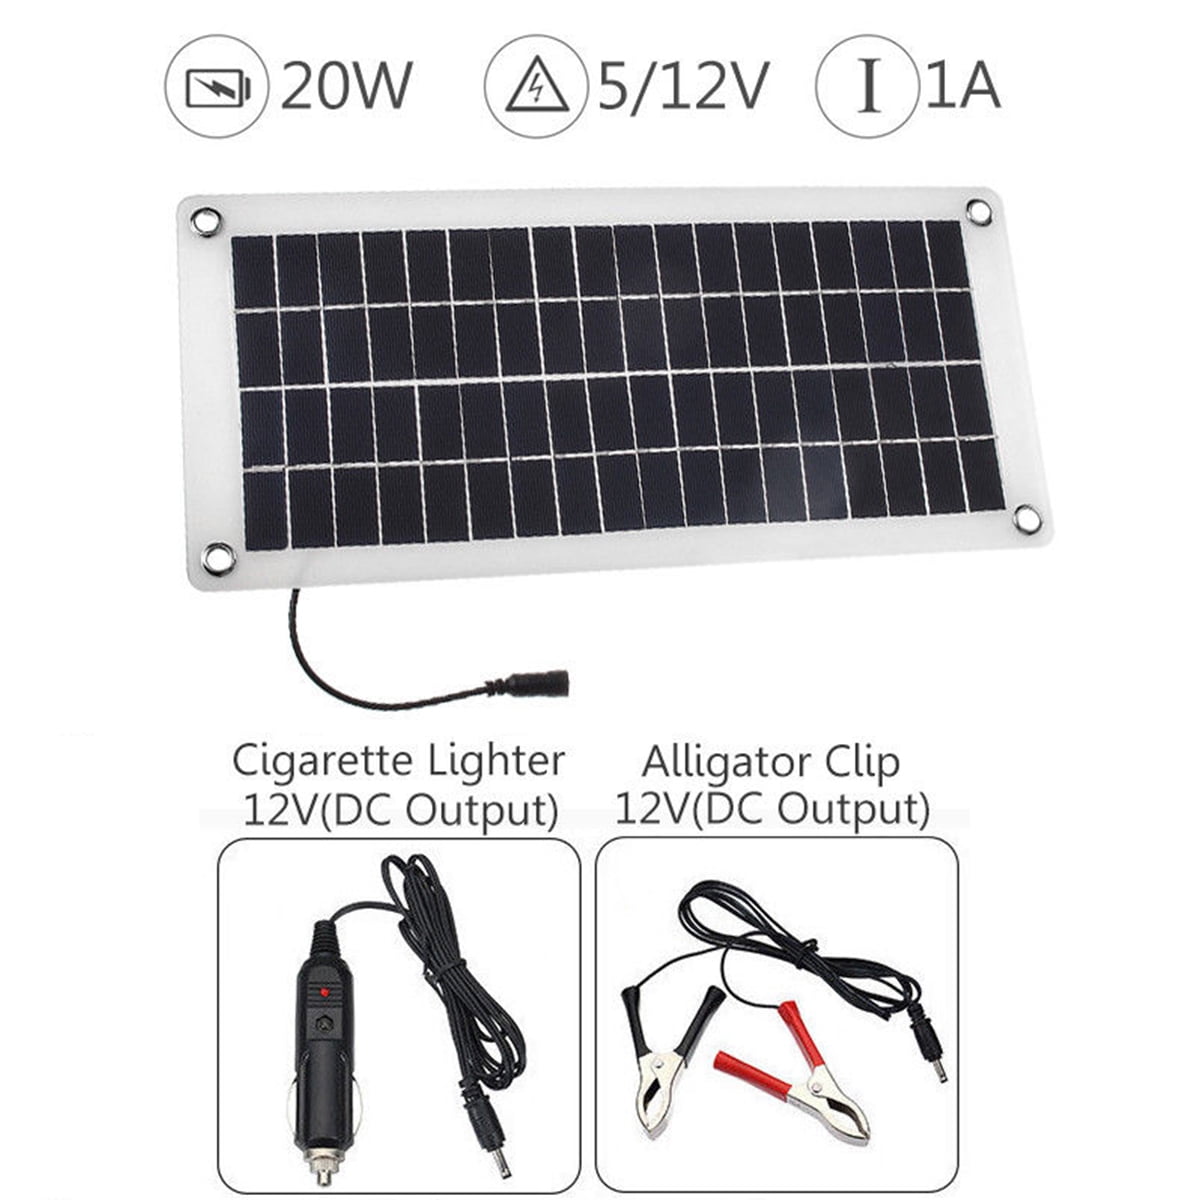 Trailer Motorcycle Powersports Portable 8W Solar Panel Trickle Charging Kit for Automotive RV Snowmobile etc. SUNER POWER 12V Solar Car Battery Charger & Maintainer Marine Boat